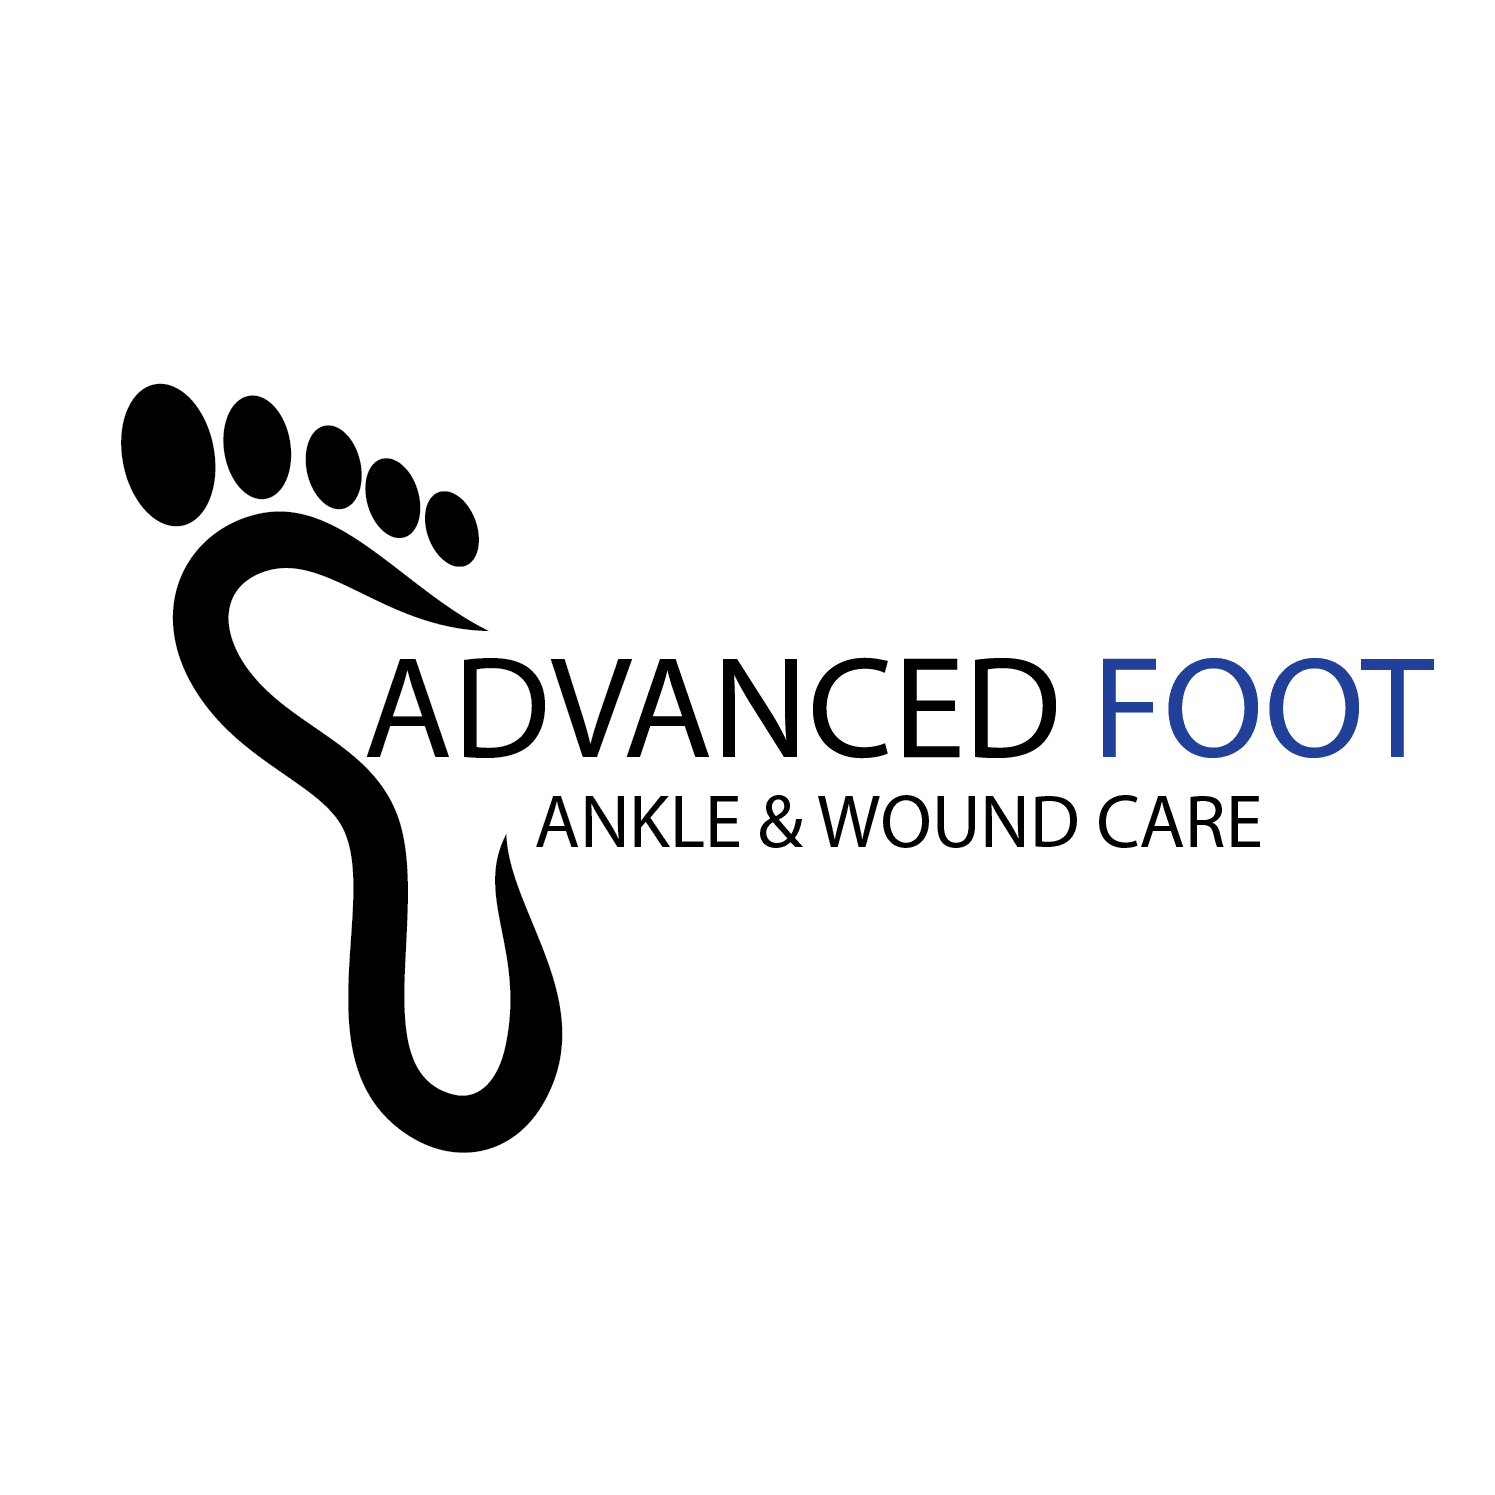 Advanced Foot, Ankle & Wound Care